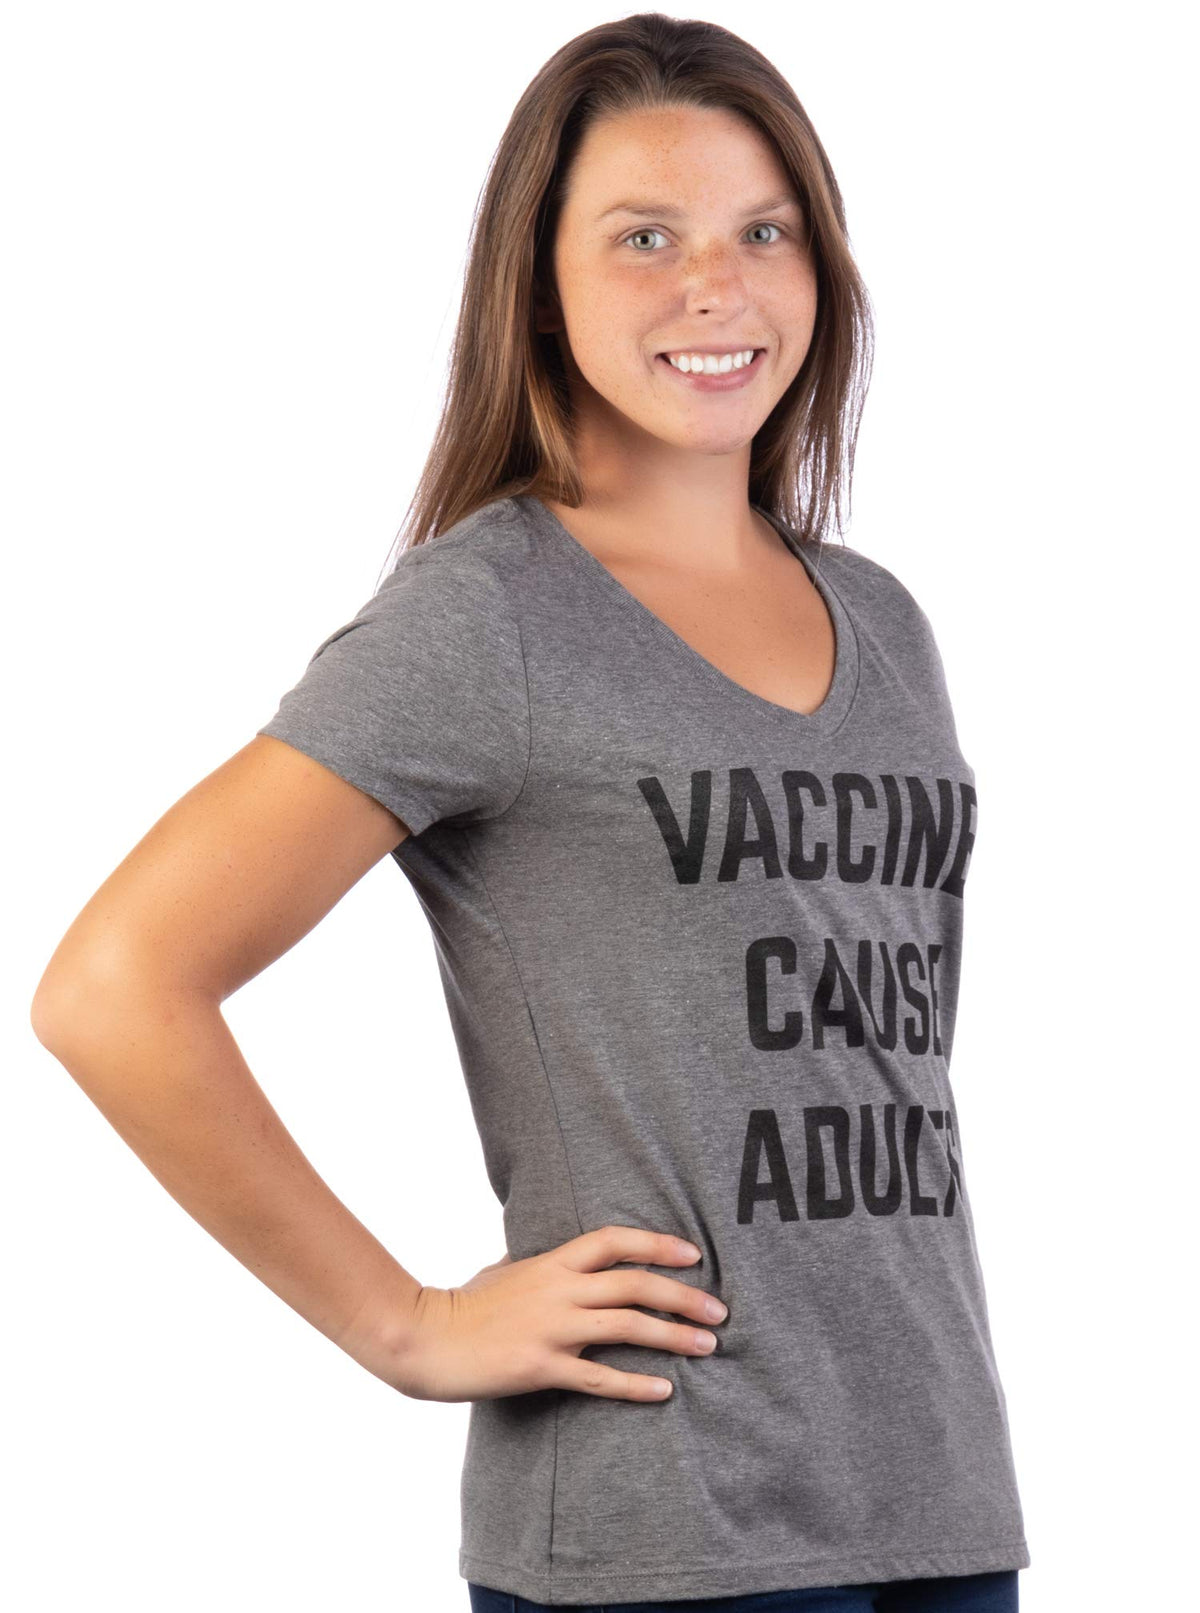 Vaccines Cause Adults | Funny Doctor Nurse Science Humor V-Neck T-Shirt - Women's